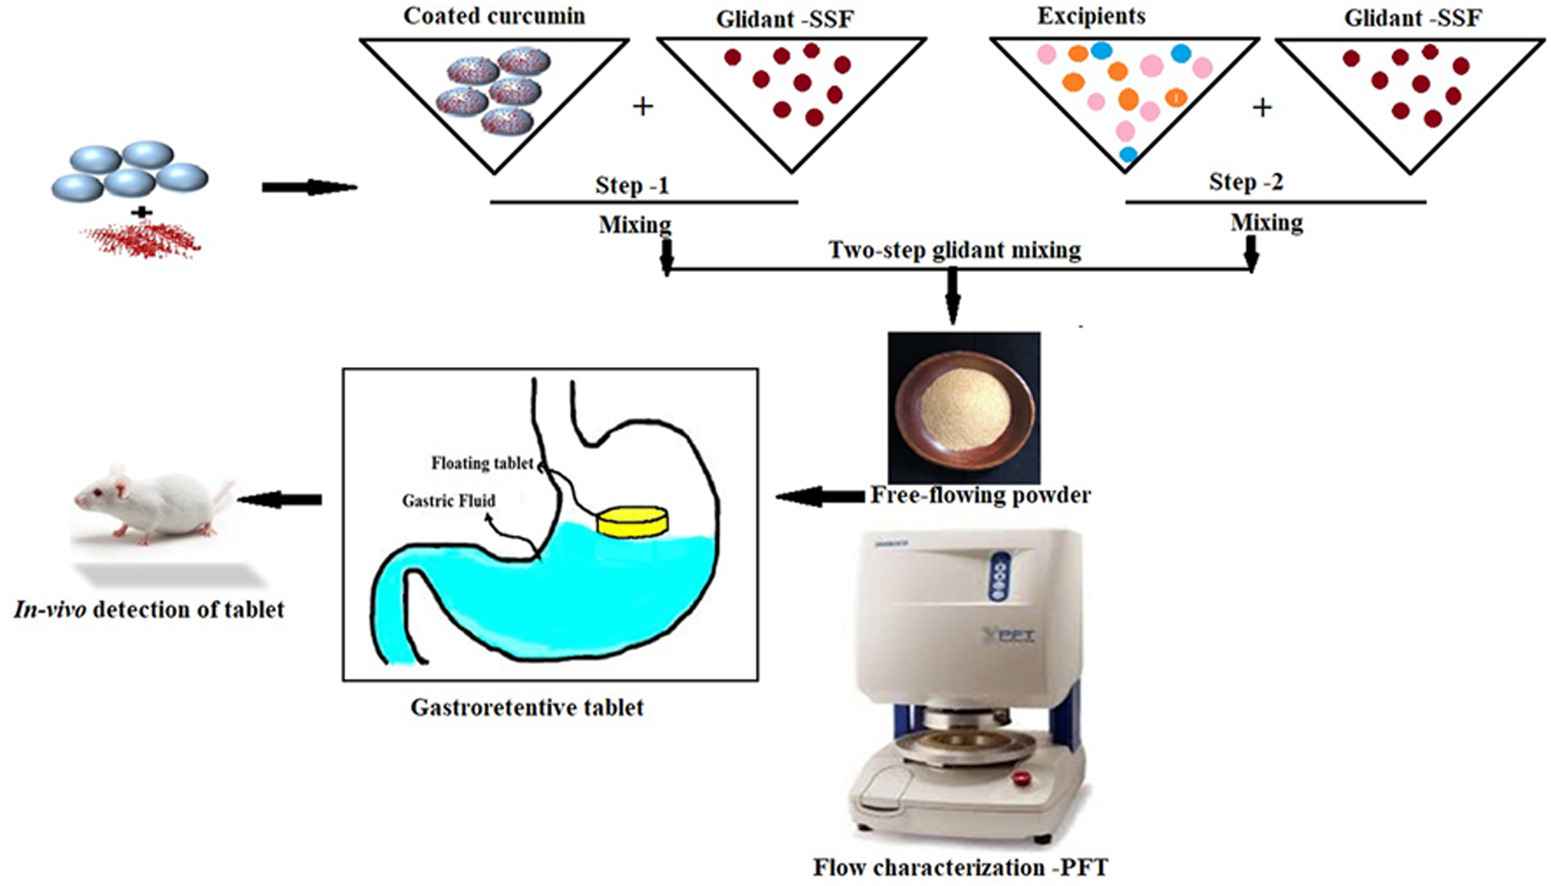 Impact of two-step glidant mixing process on flow performance of coated curcumin - in vitro, in vivo investigation